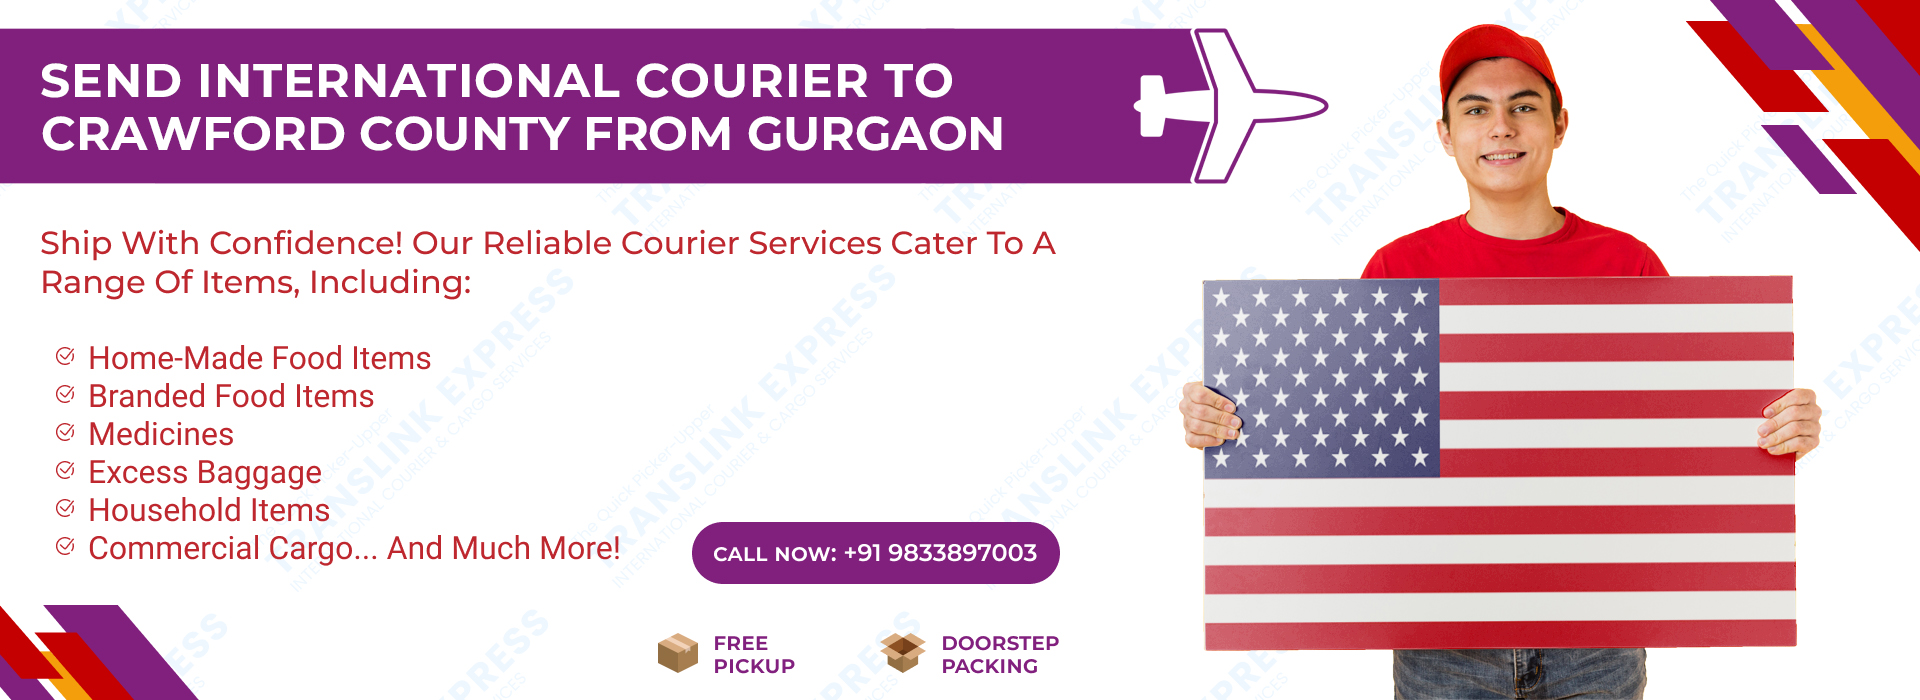 Courier to Crawford County From Gurgaon